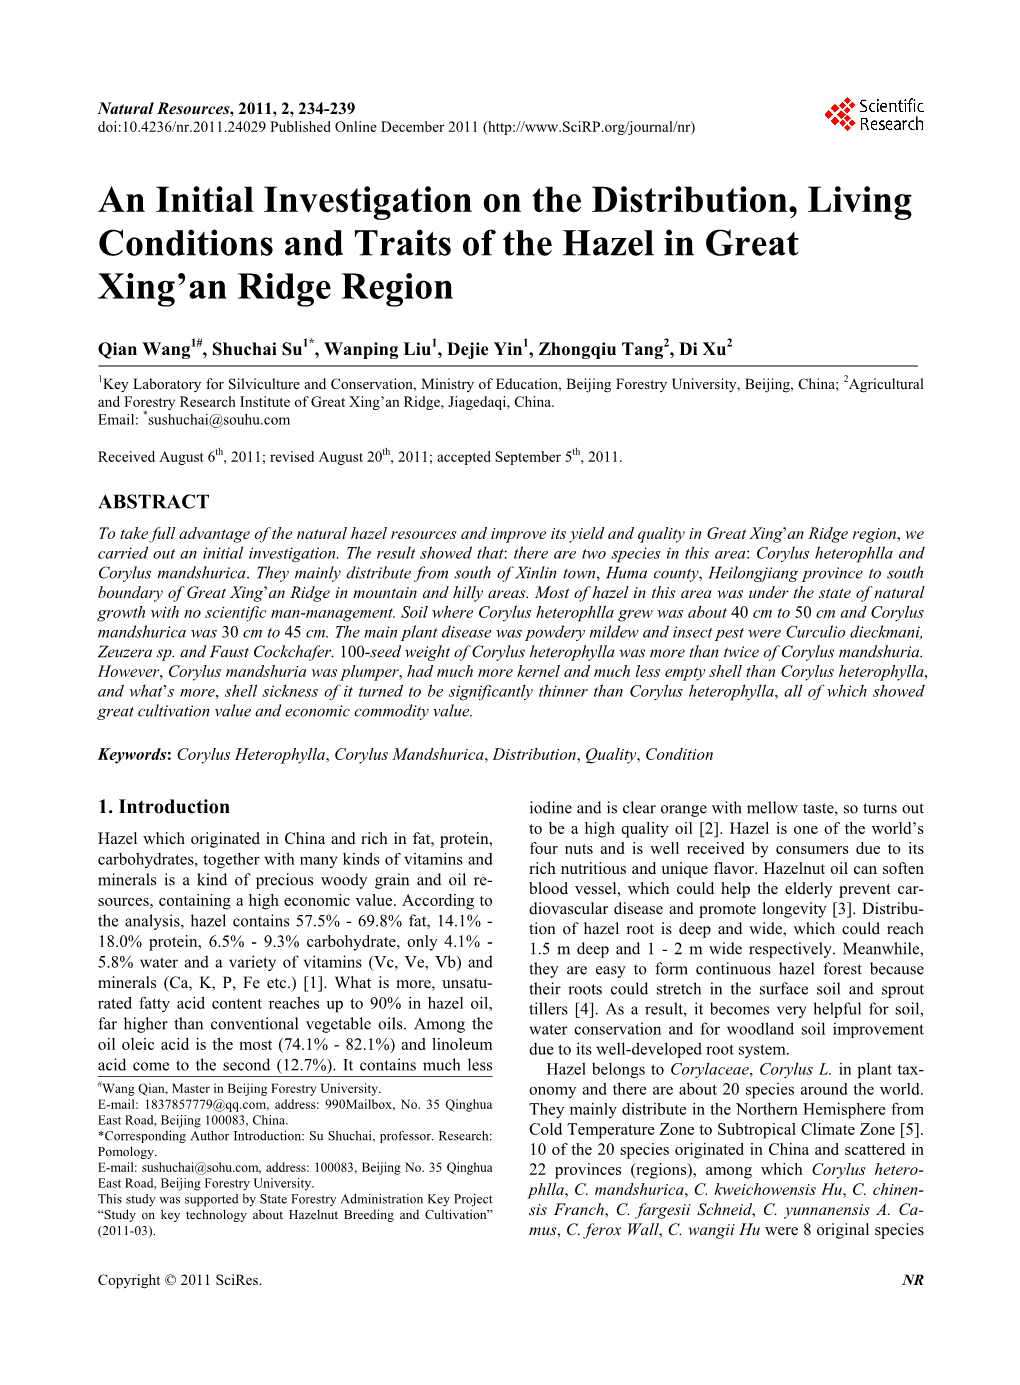 An Initial Investigation on the Distribution, Living Conditions and Traits of the Hazel in Great Xing’An Ridge Region